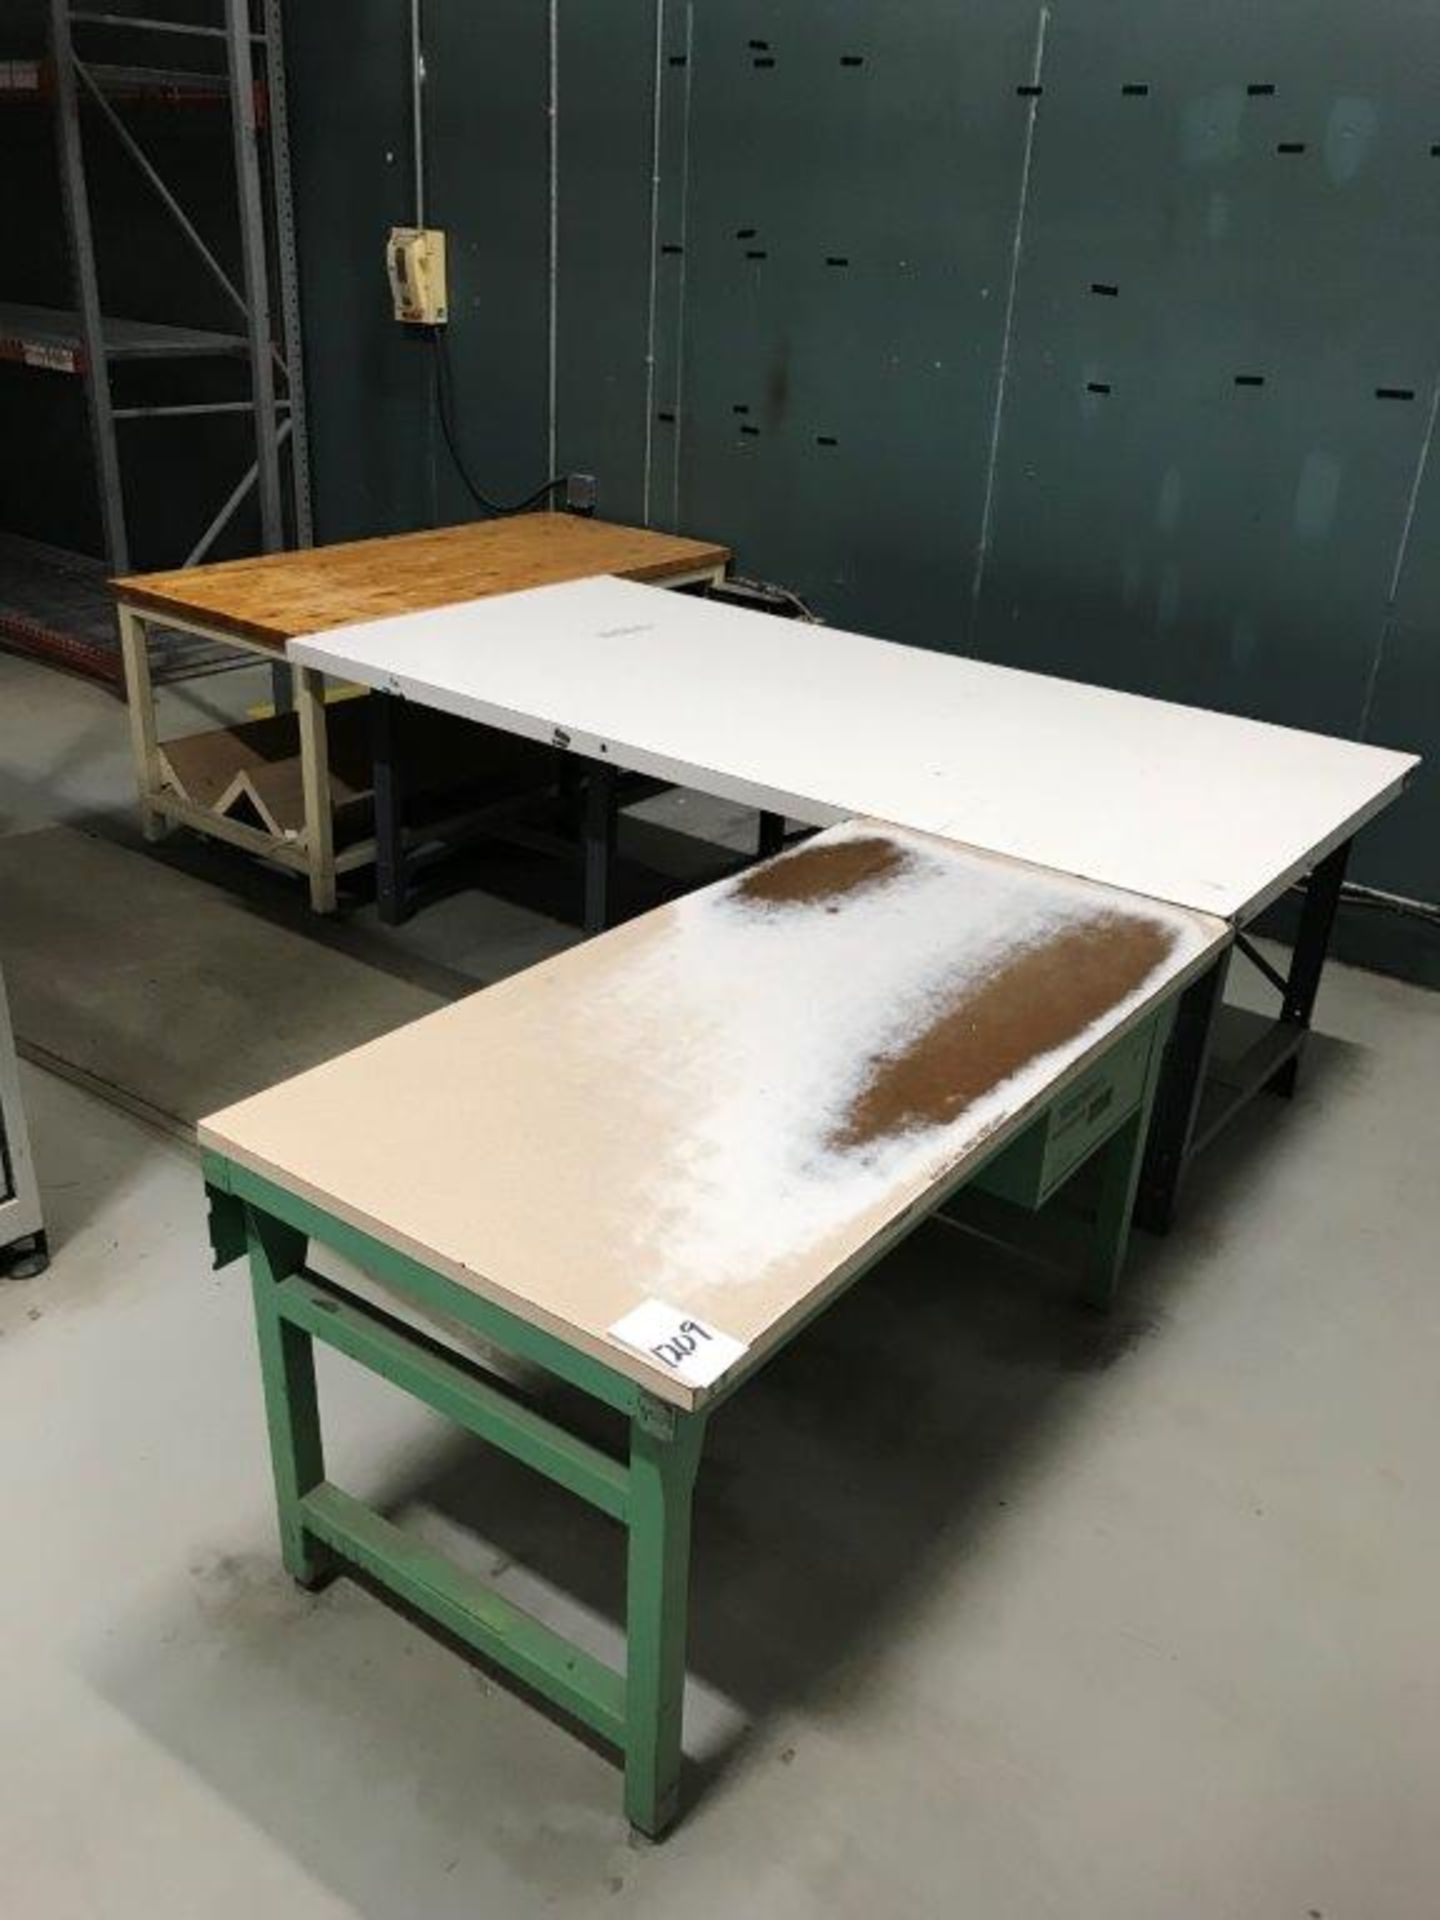 Lot of Assorted Work Tables, Cabinets, Shelves and Misc.